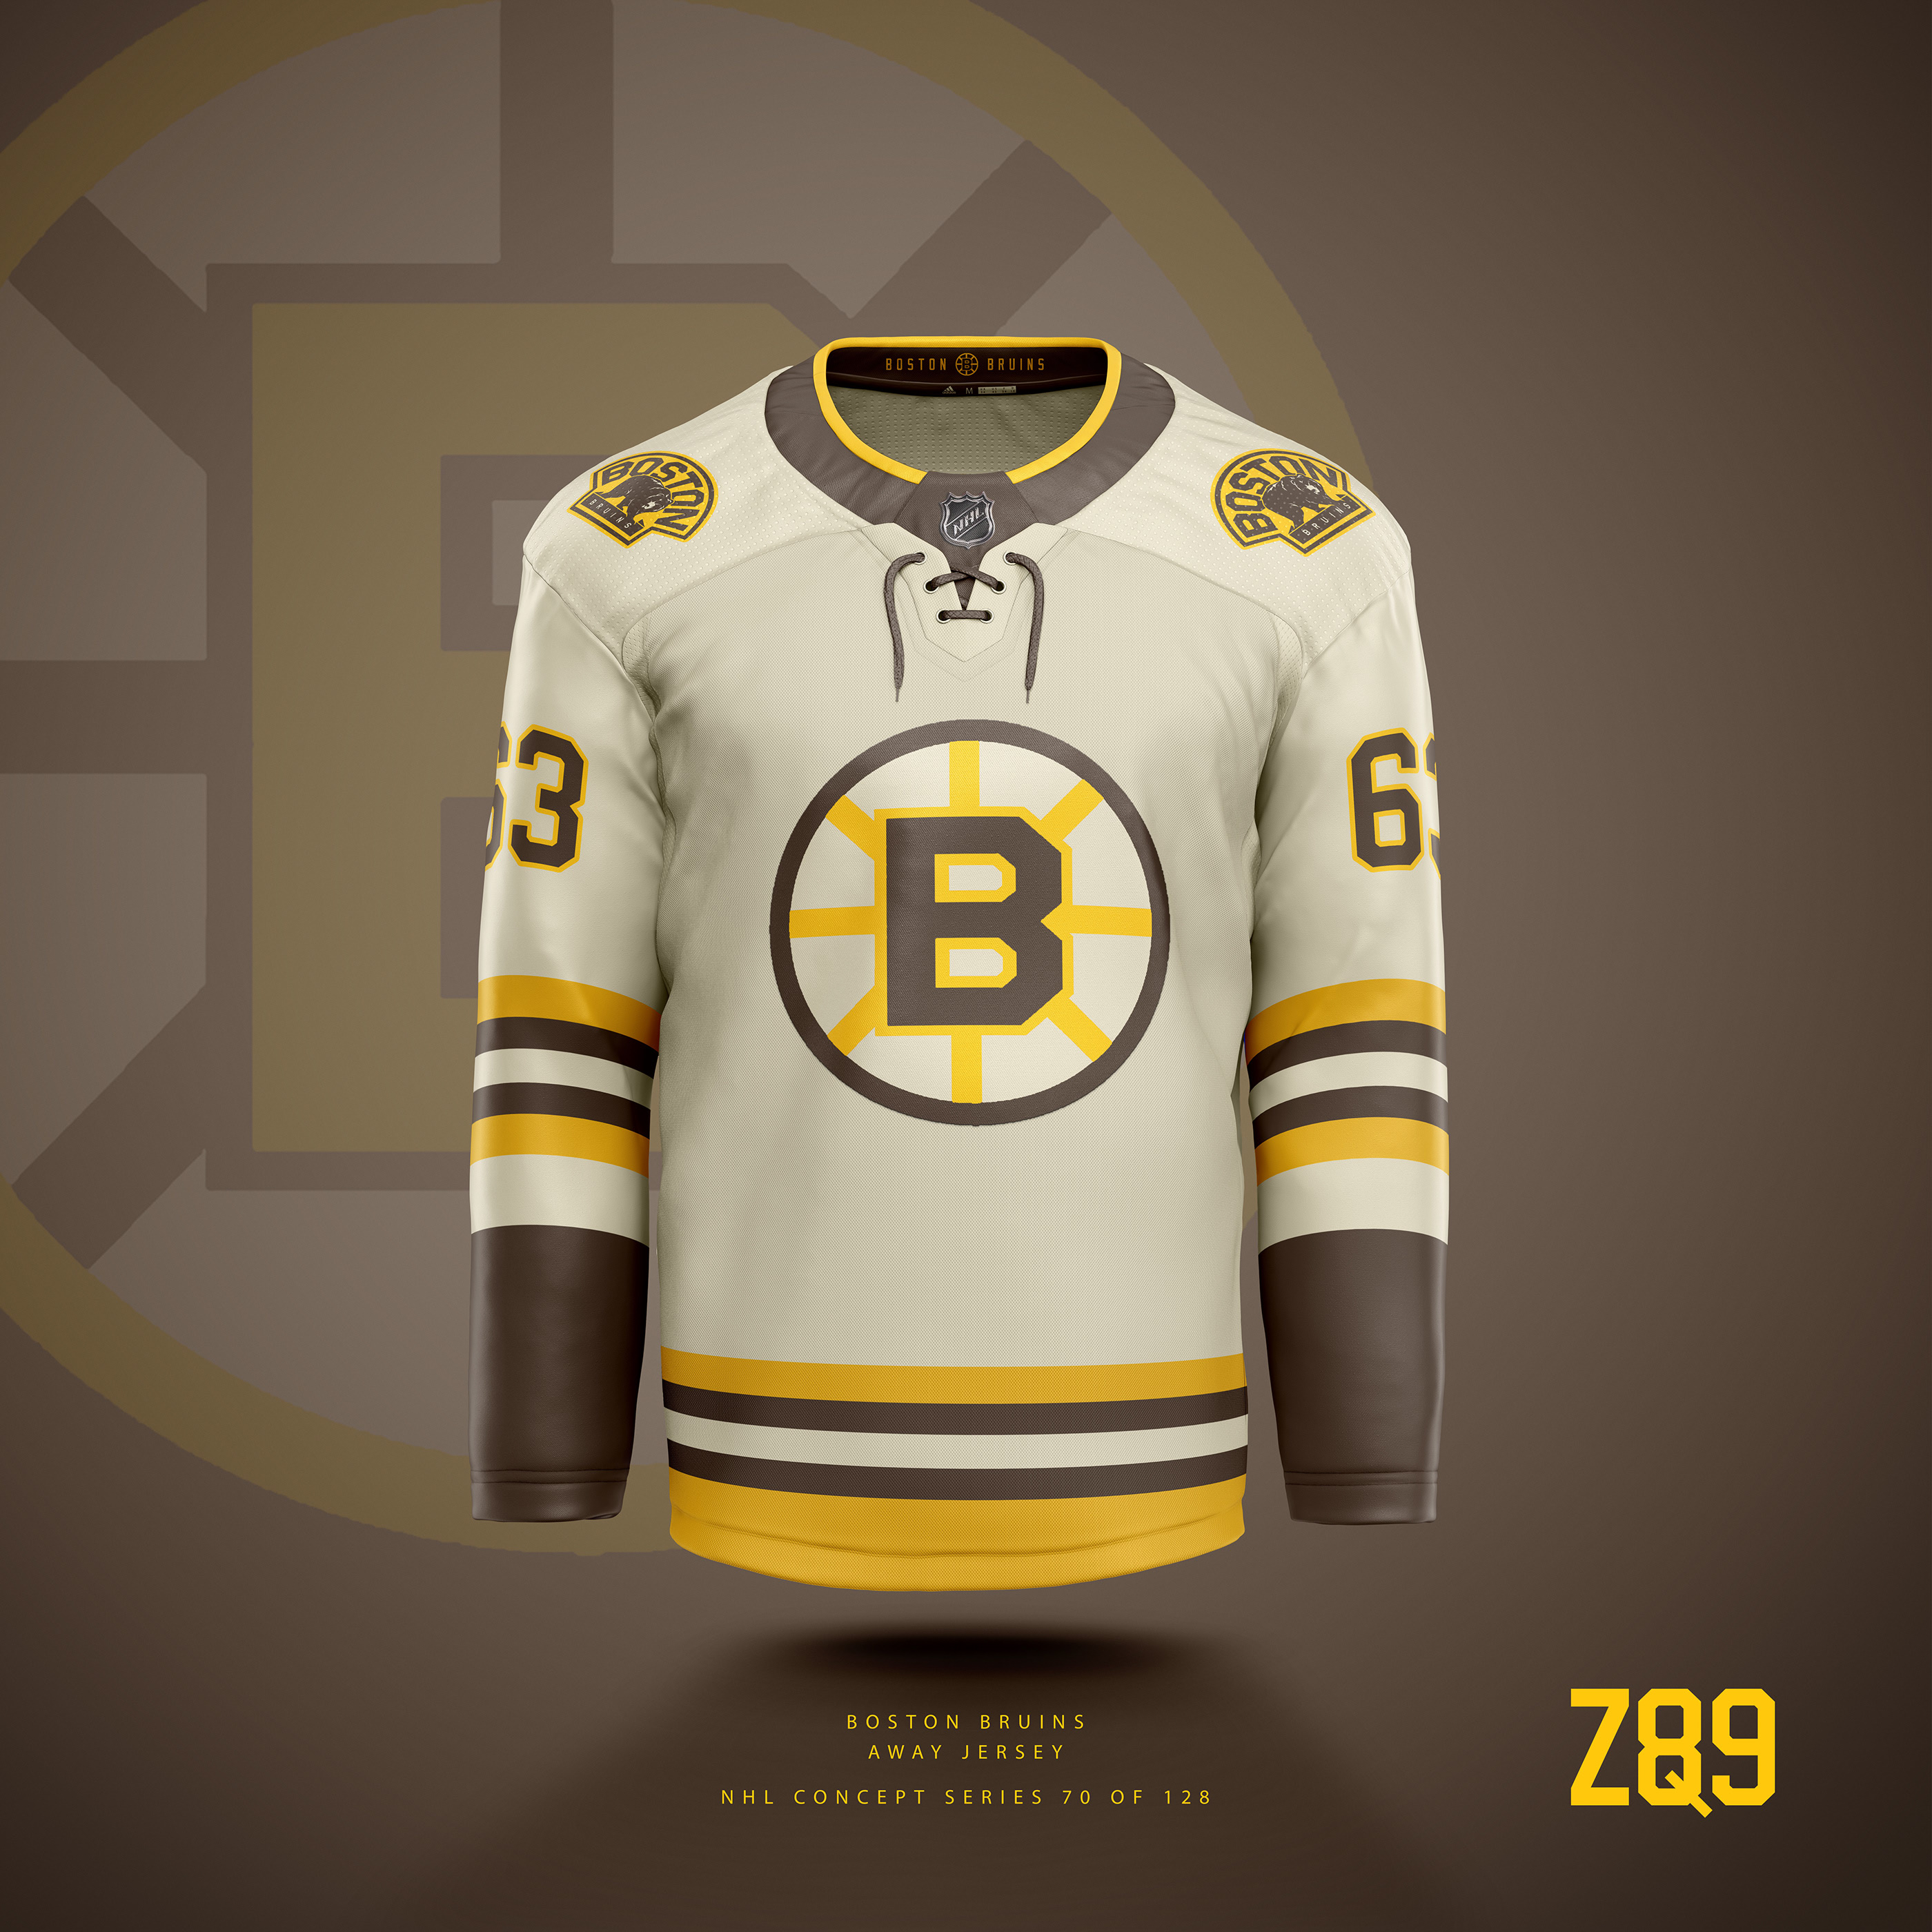 NHL Inspired Football Concept Uniforms on Behance